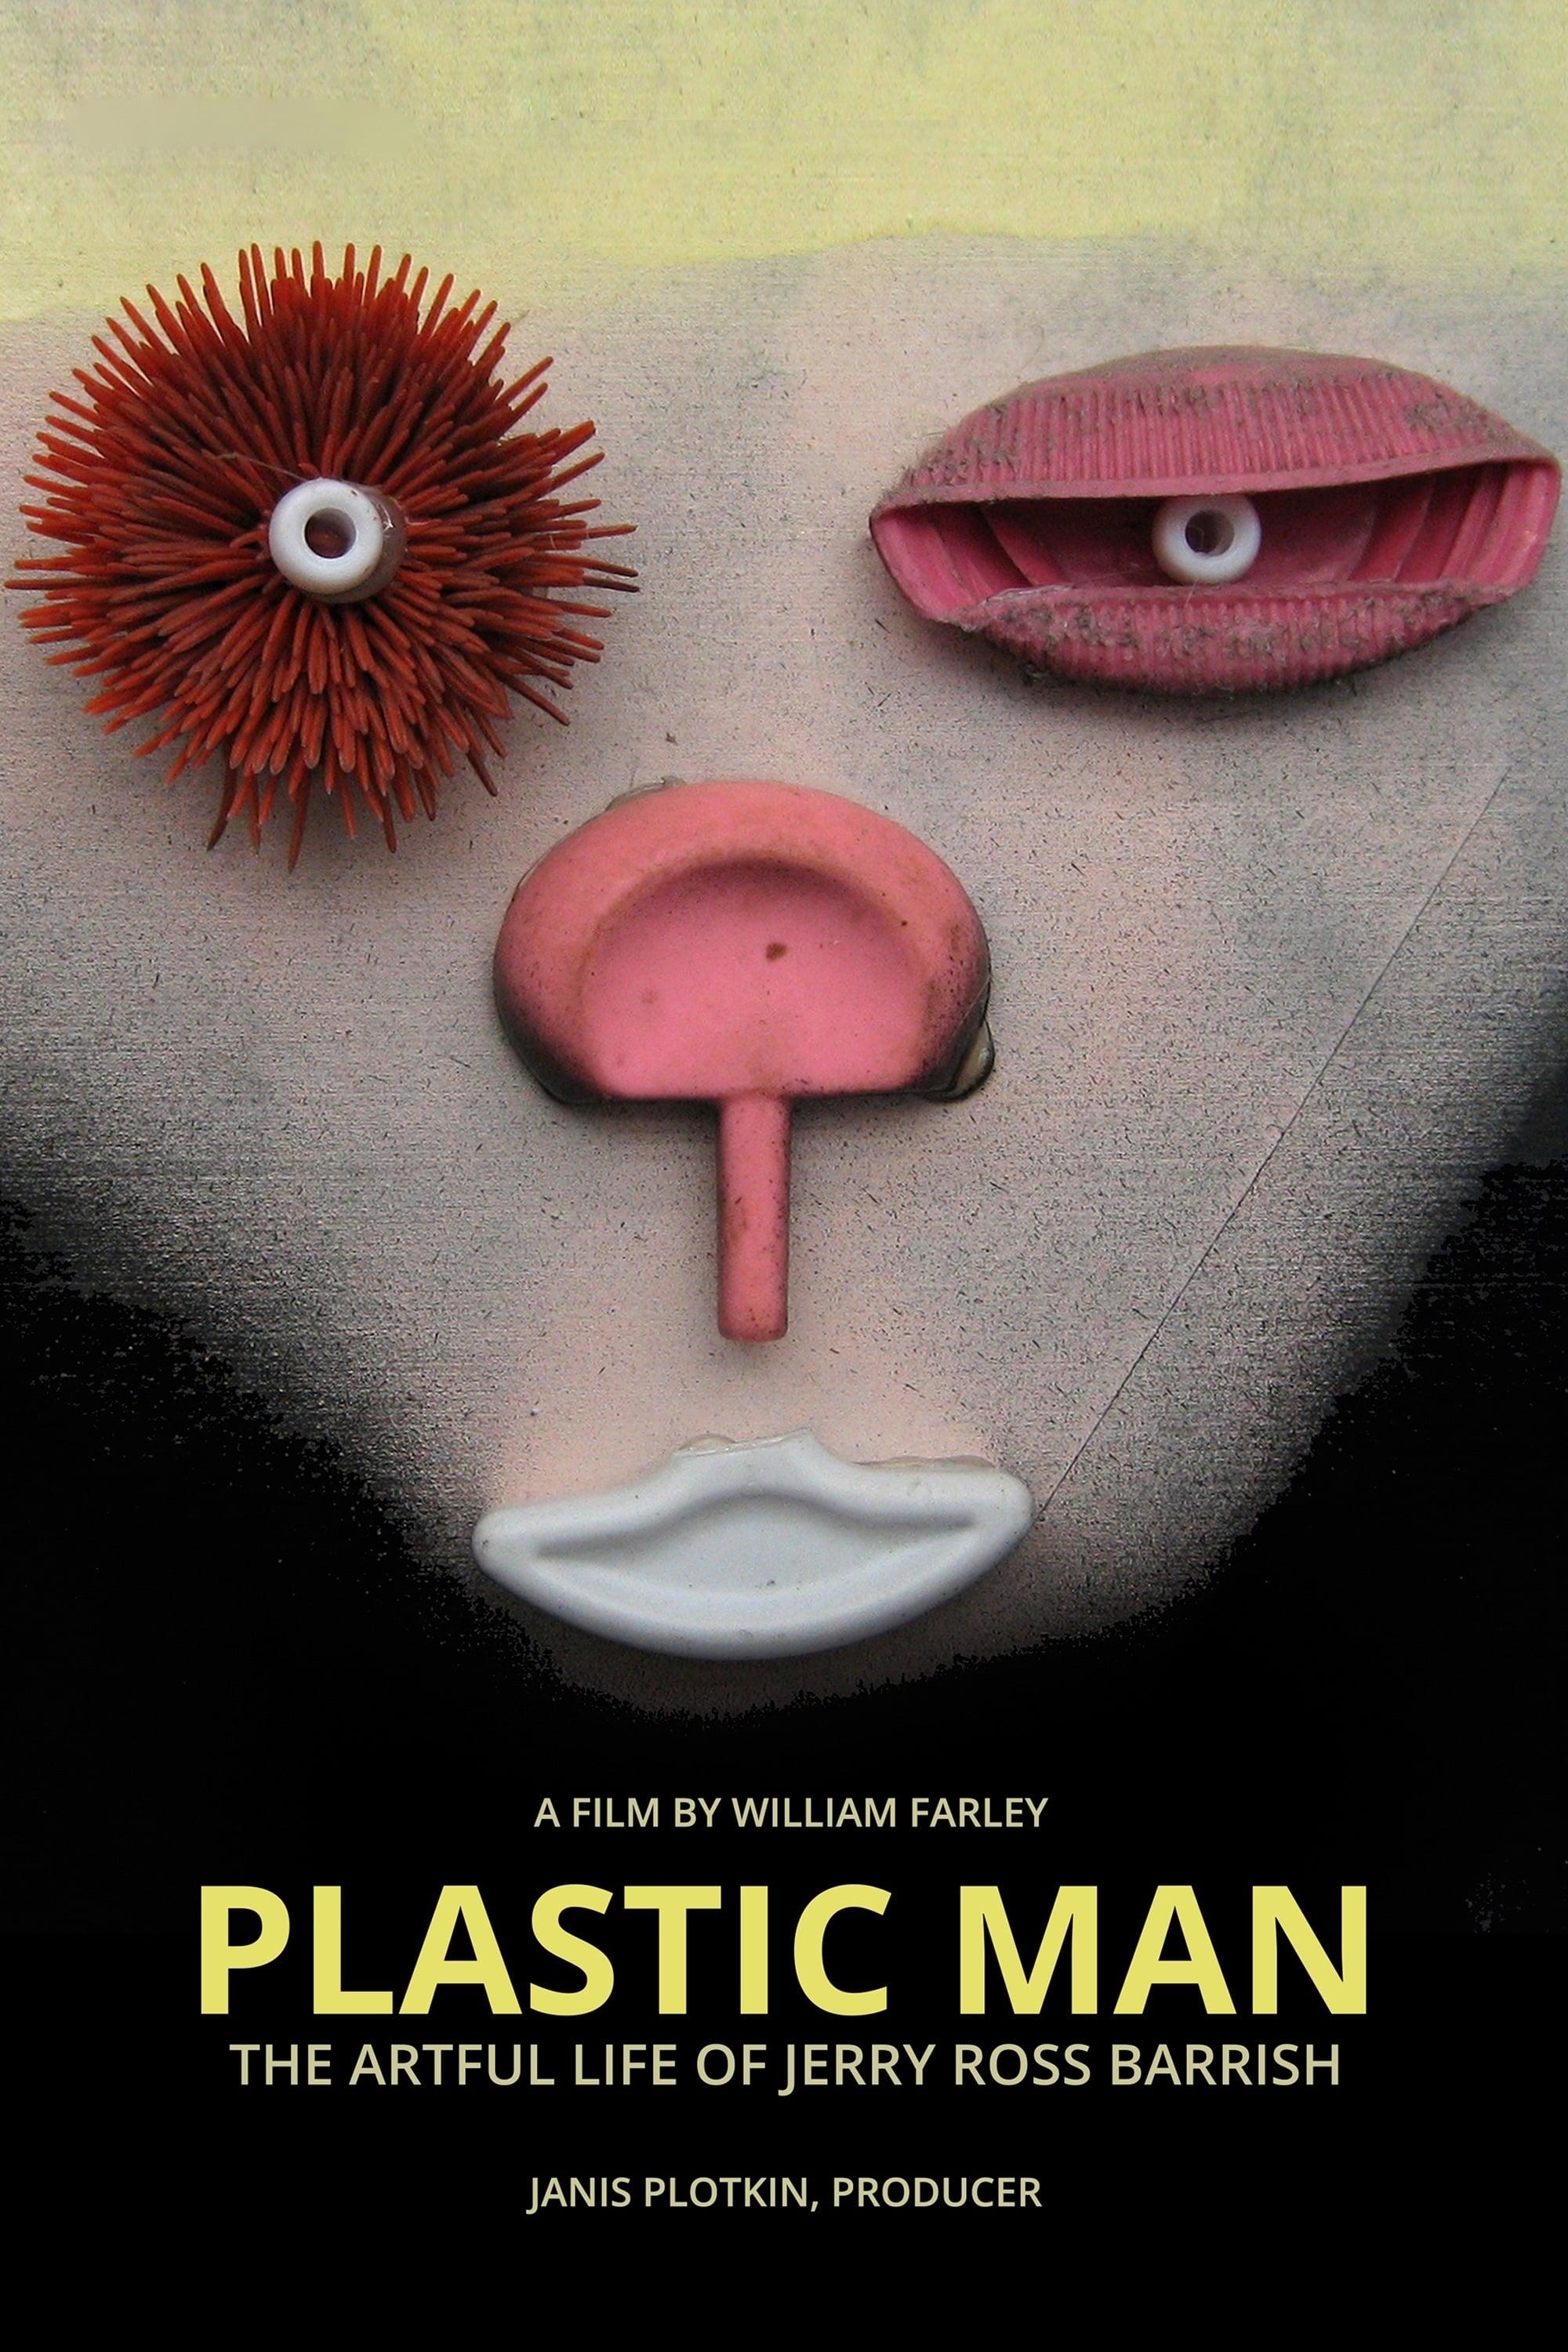 Plastic Man: The Artful Life of Jerry Ross Barrish poster